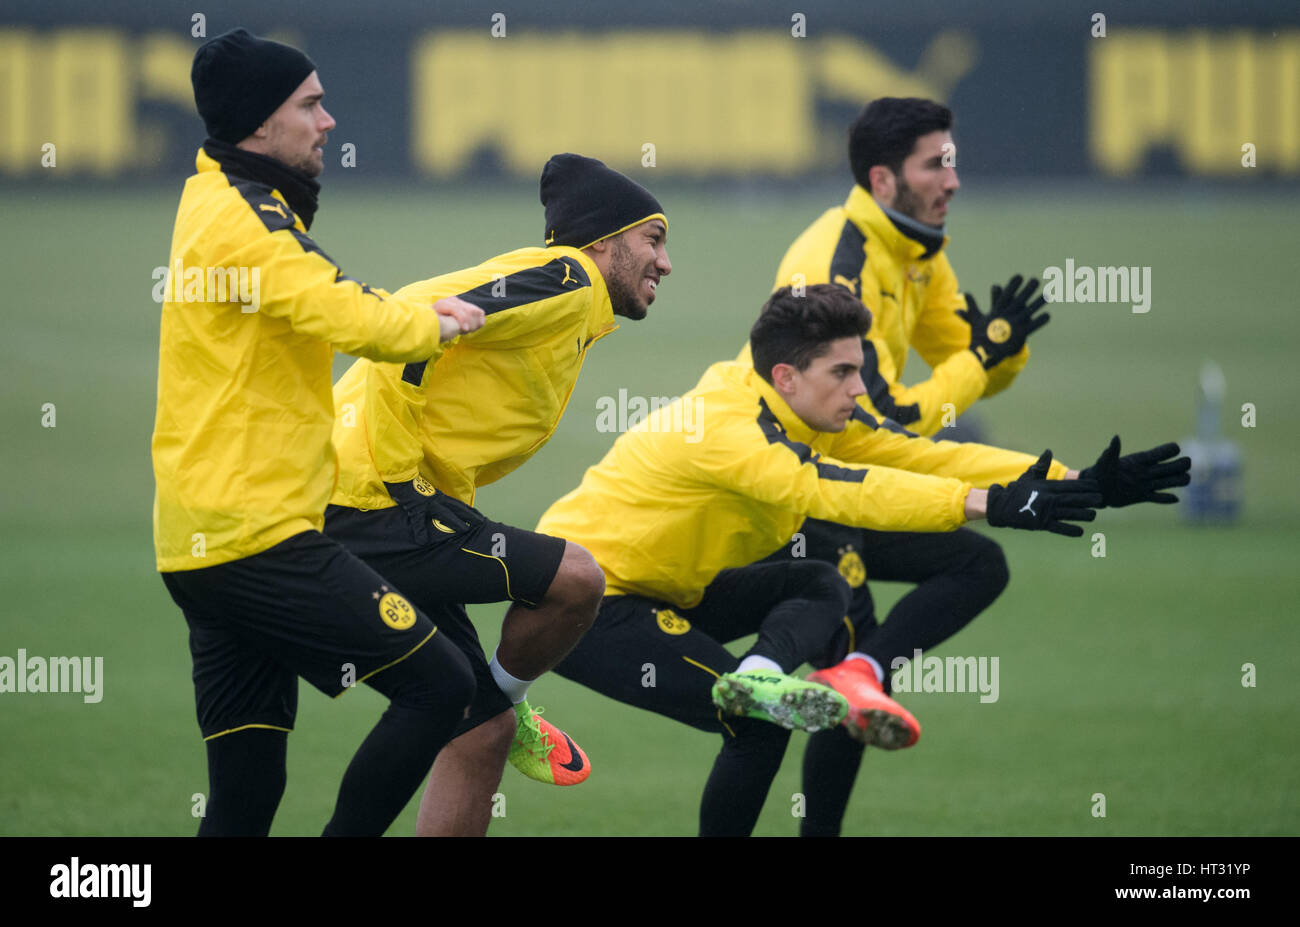 Dortmund, Germany. 7th Mar, 2017. Borussia Dortmund players (l to r) Marcel Schmelzer, Pierre-Emerick Aubameyang, Marc Bartra and Nuri Sahin stretch on the training grounds in Dortmund, Germany, 7 March 2017. BVB will meet Benfica Lissabon in the second round second legs of the Champions League (8.03.). Photo: Bernd Thissen/dpa/Alamy Live News Stock Photo